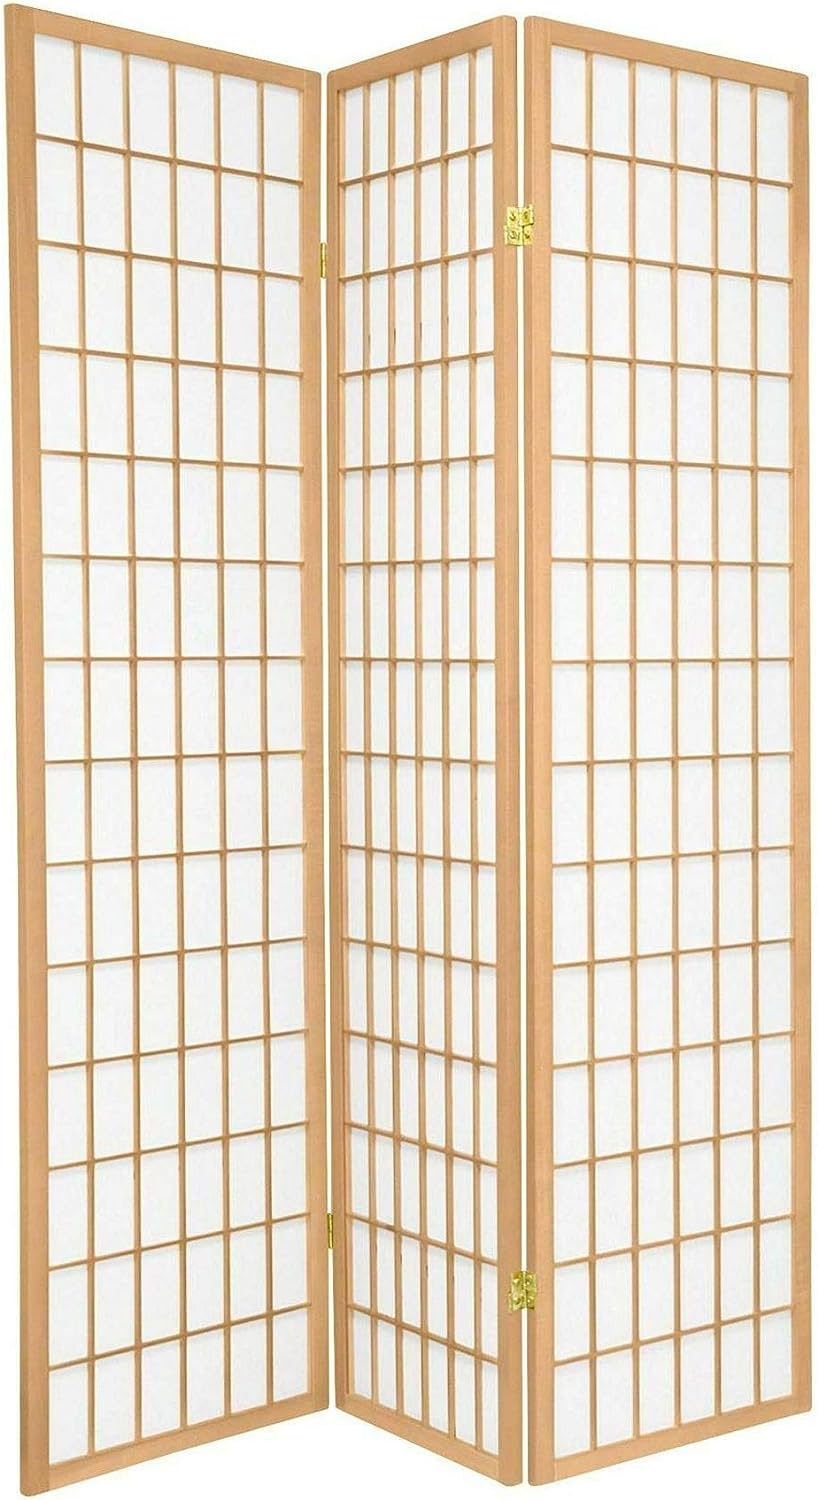 Legacy Decor 3 Panels Room Divider Privacy Screen Partition Shoji Style 6 ft Tall Black Finish